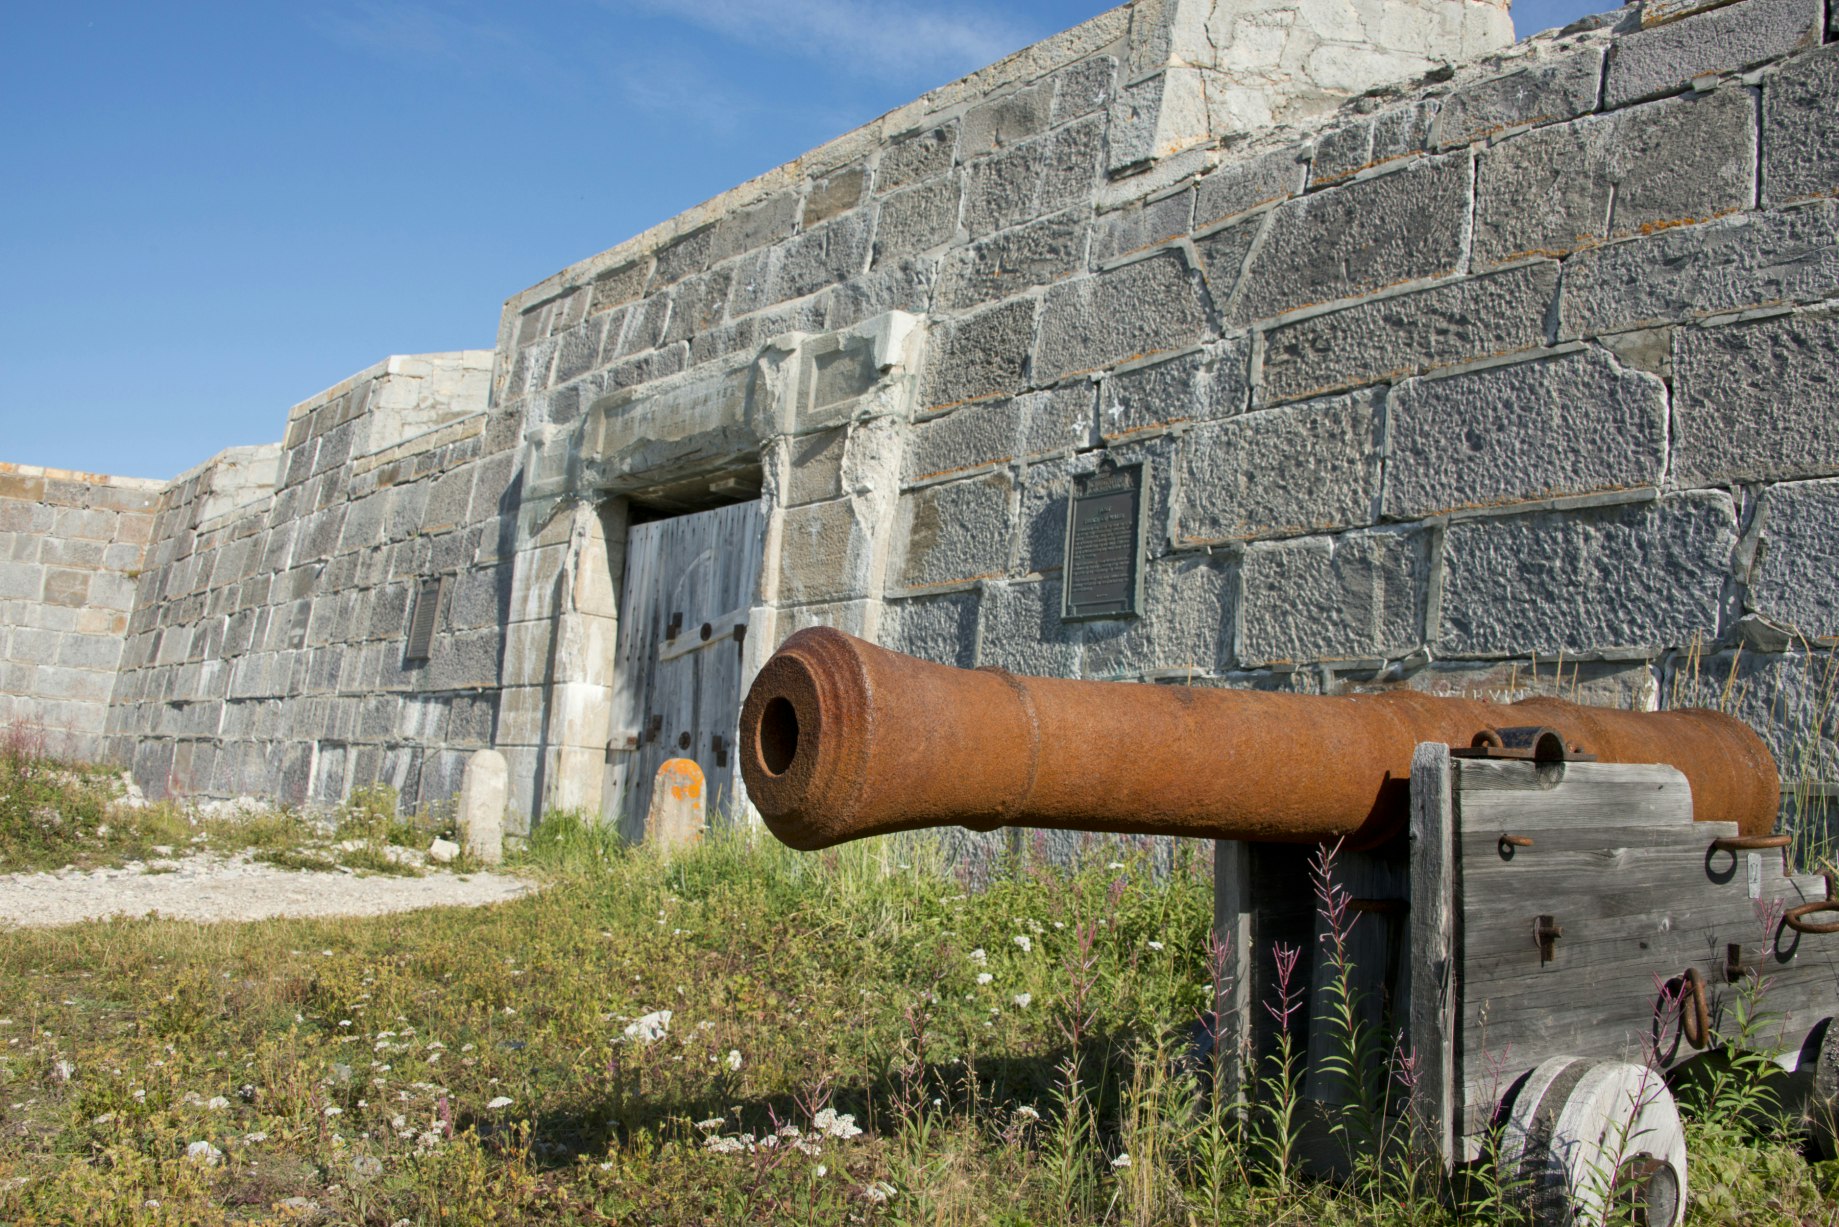 Parks Canada, National Historic Site of Canada, Prince of Wales Fort, Antique cannon in front of fort wall, Churchill, Manitoba, Canada